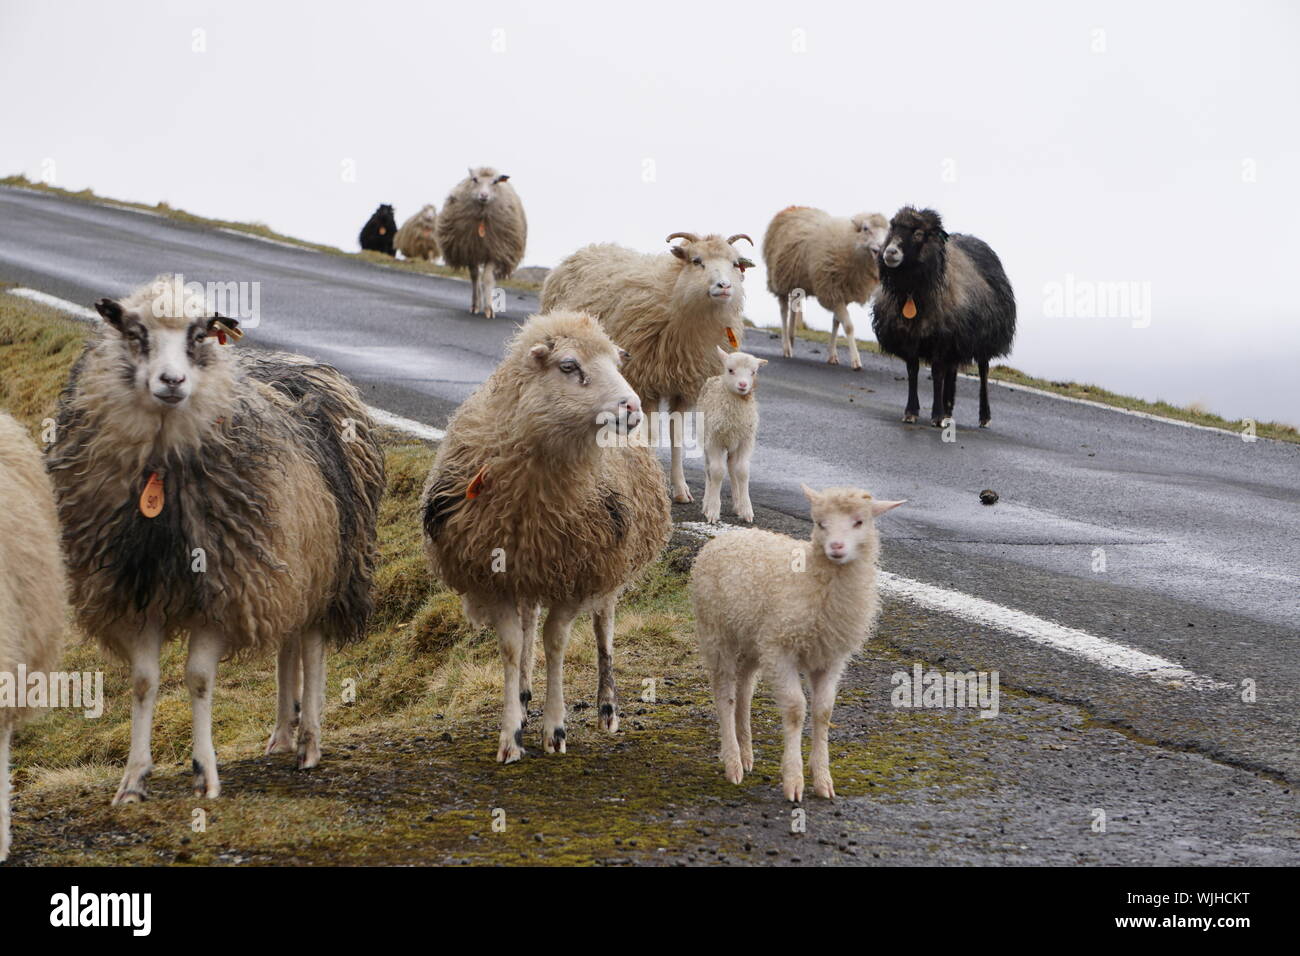 Flock Of Sheep On Road Against Clear Sky Stock Photo